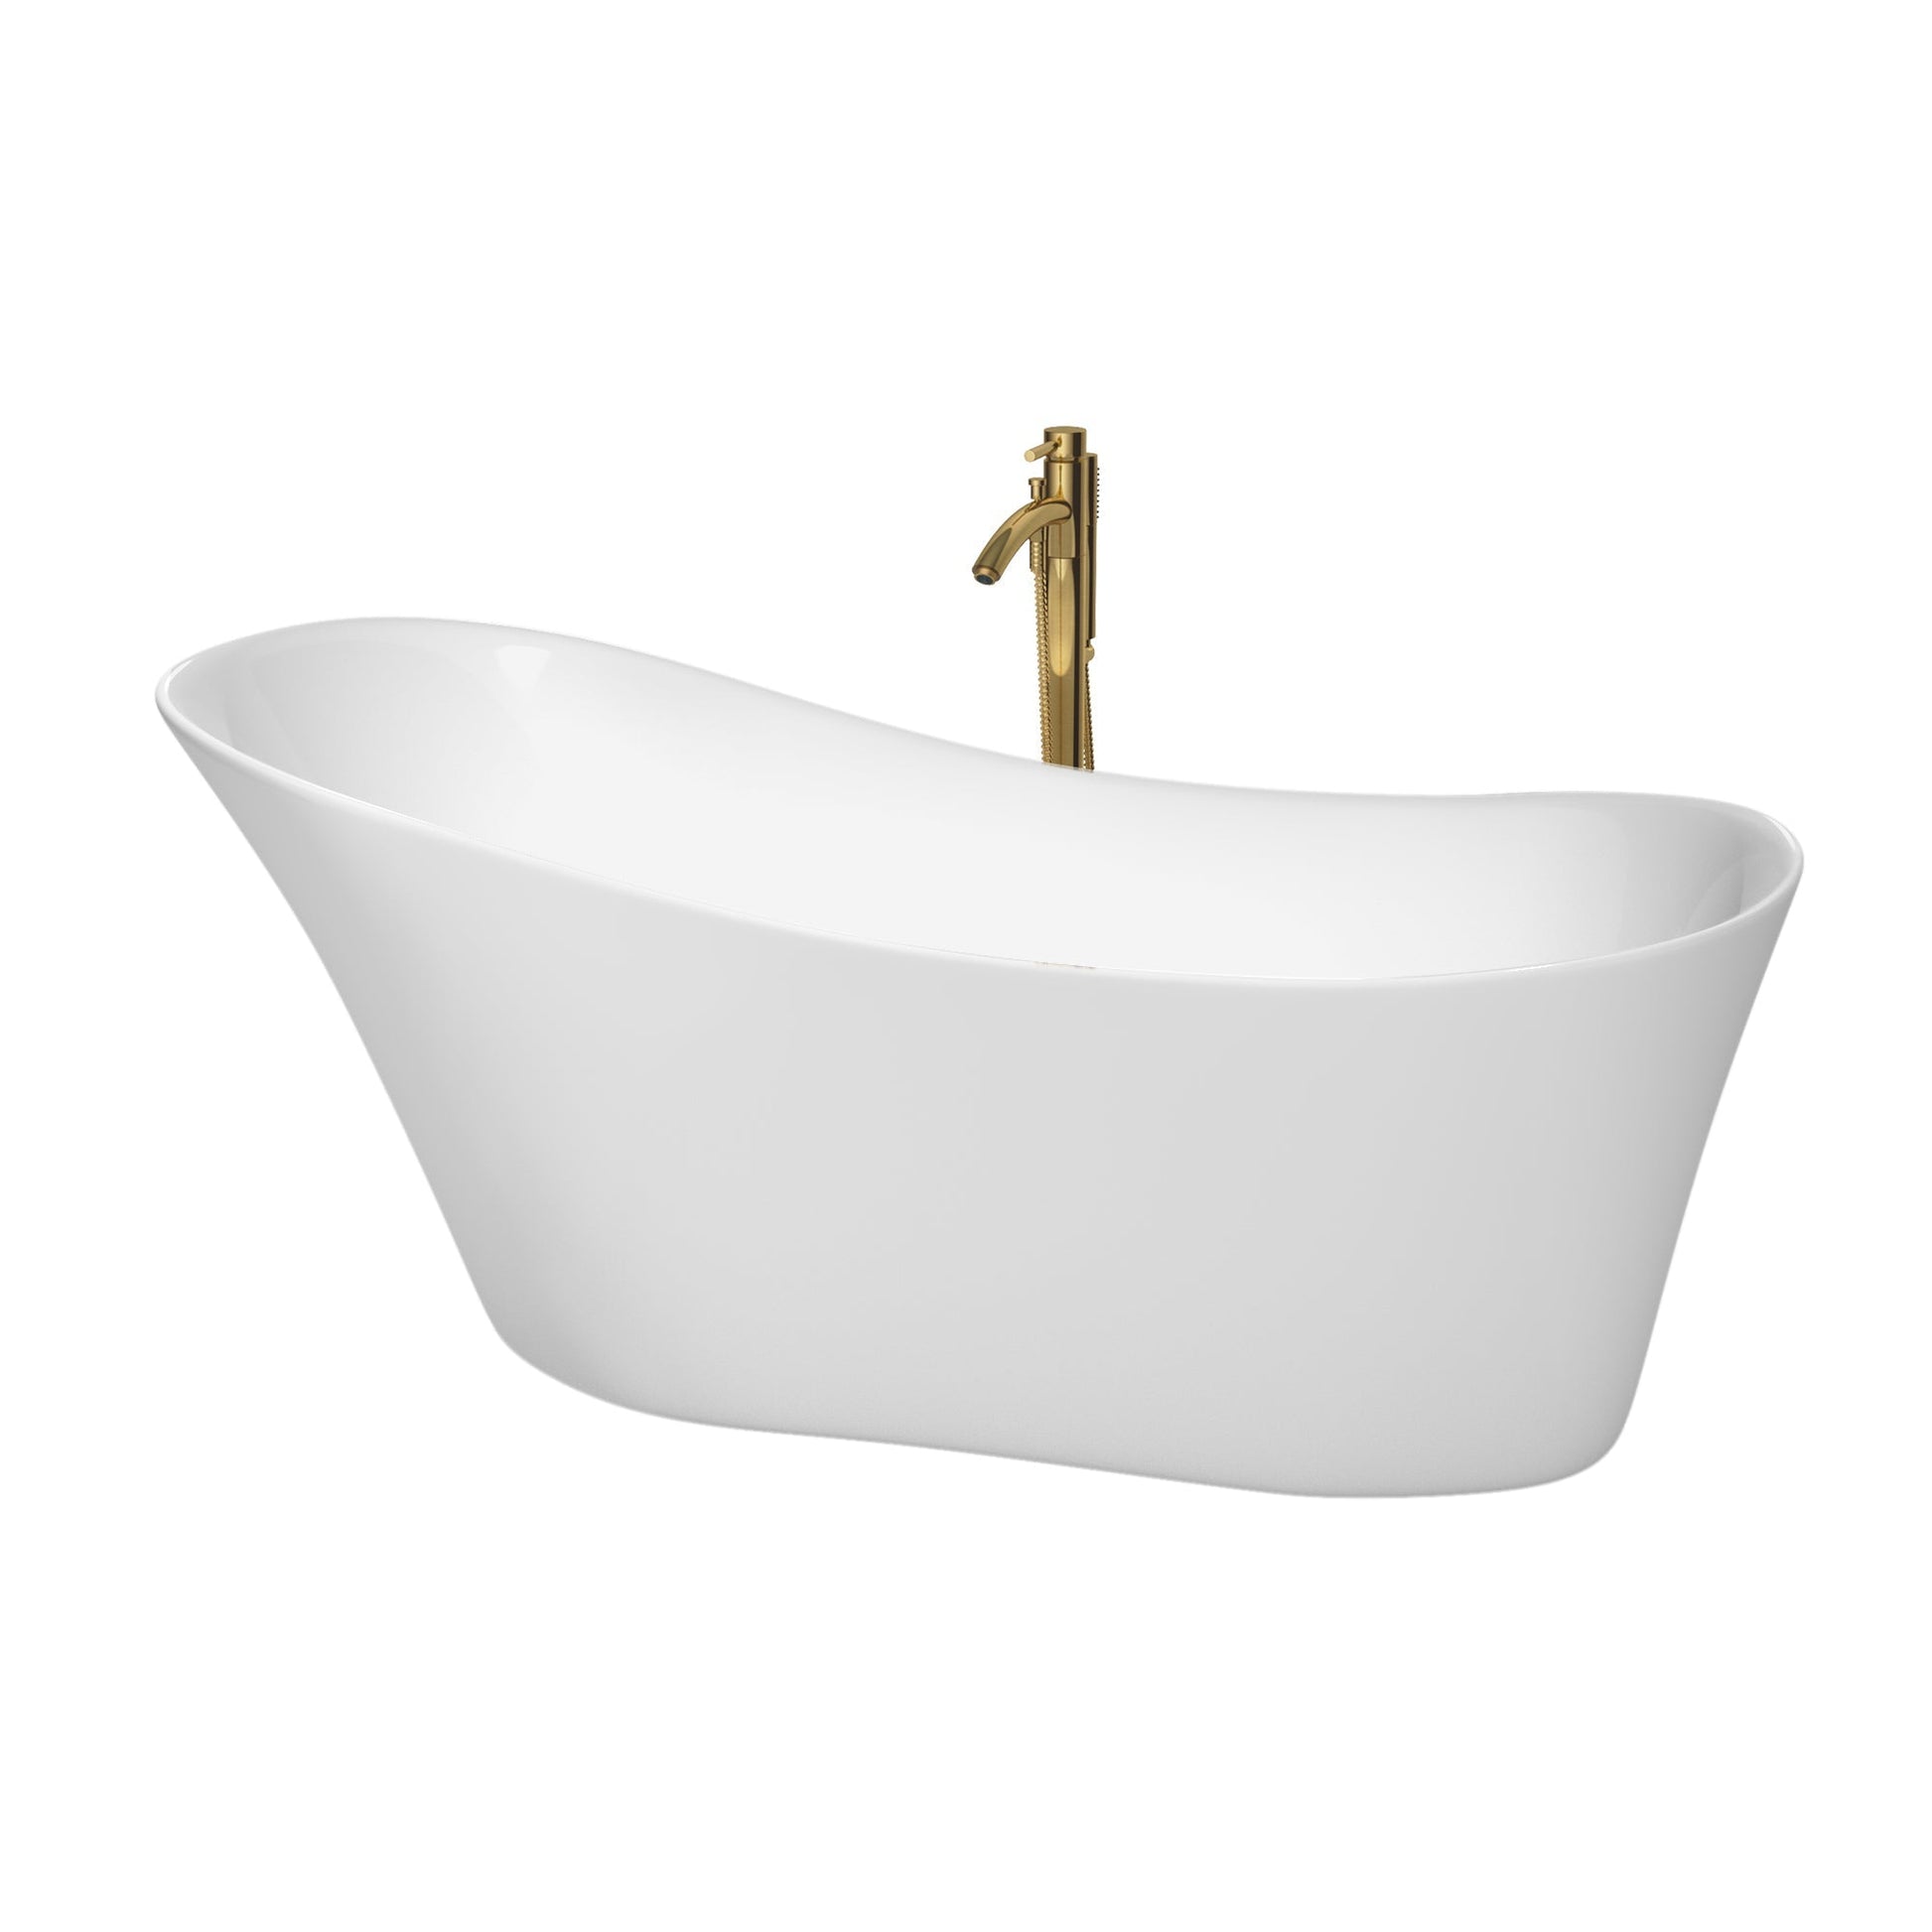 Wyndham Collection Janice 67" Freestanding Bathtub in White With Shiny White Trim and Floor Mounted Faucet in Brushed Gold